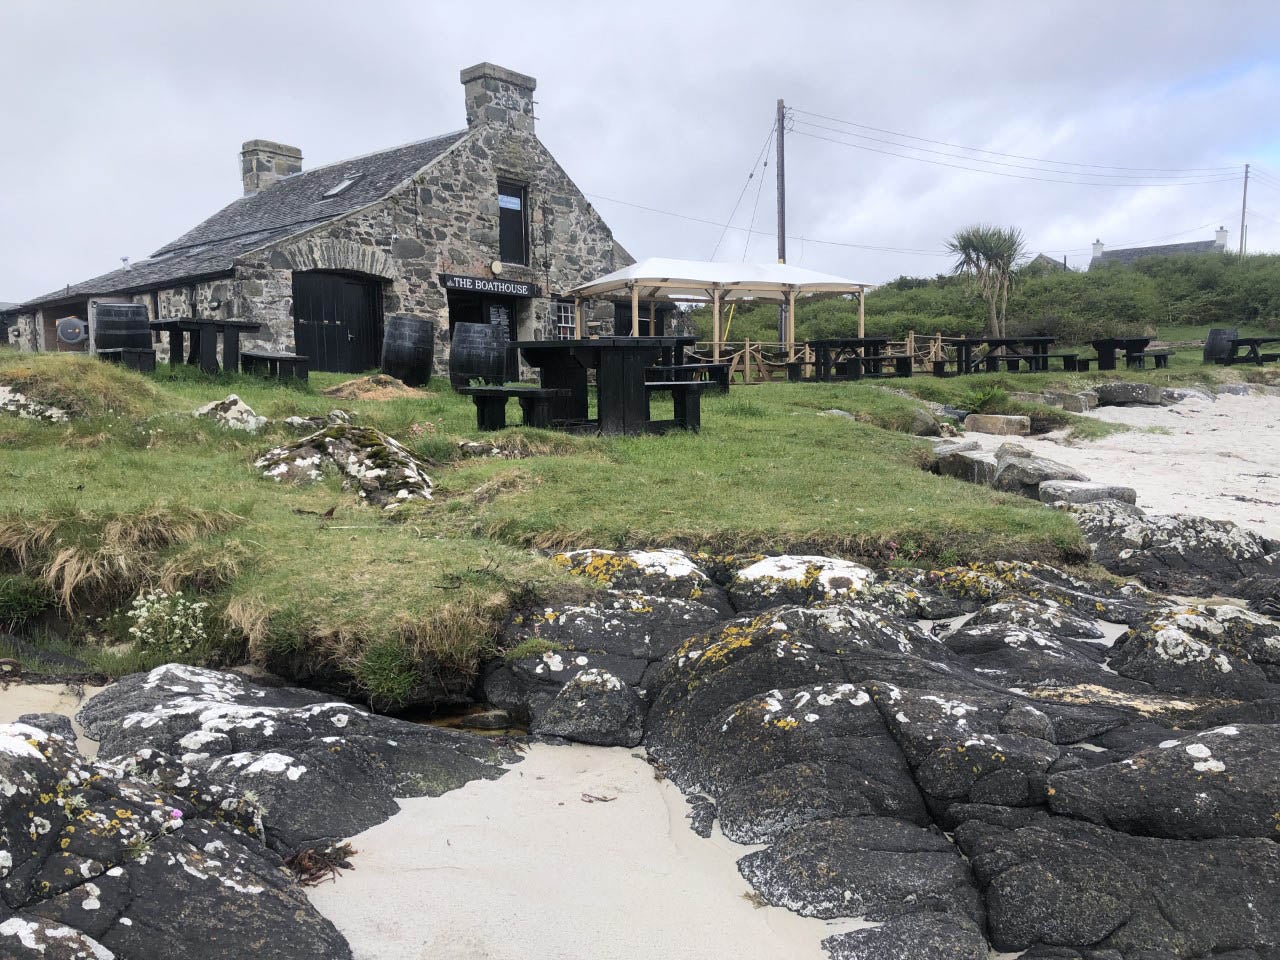 The 300-year-old Boathouse is one of the oldest such buildings on the island